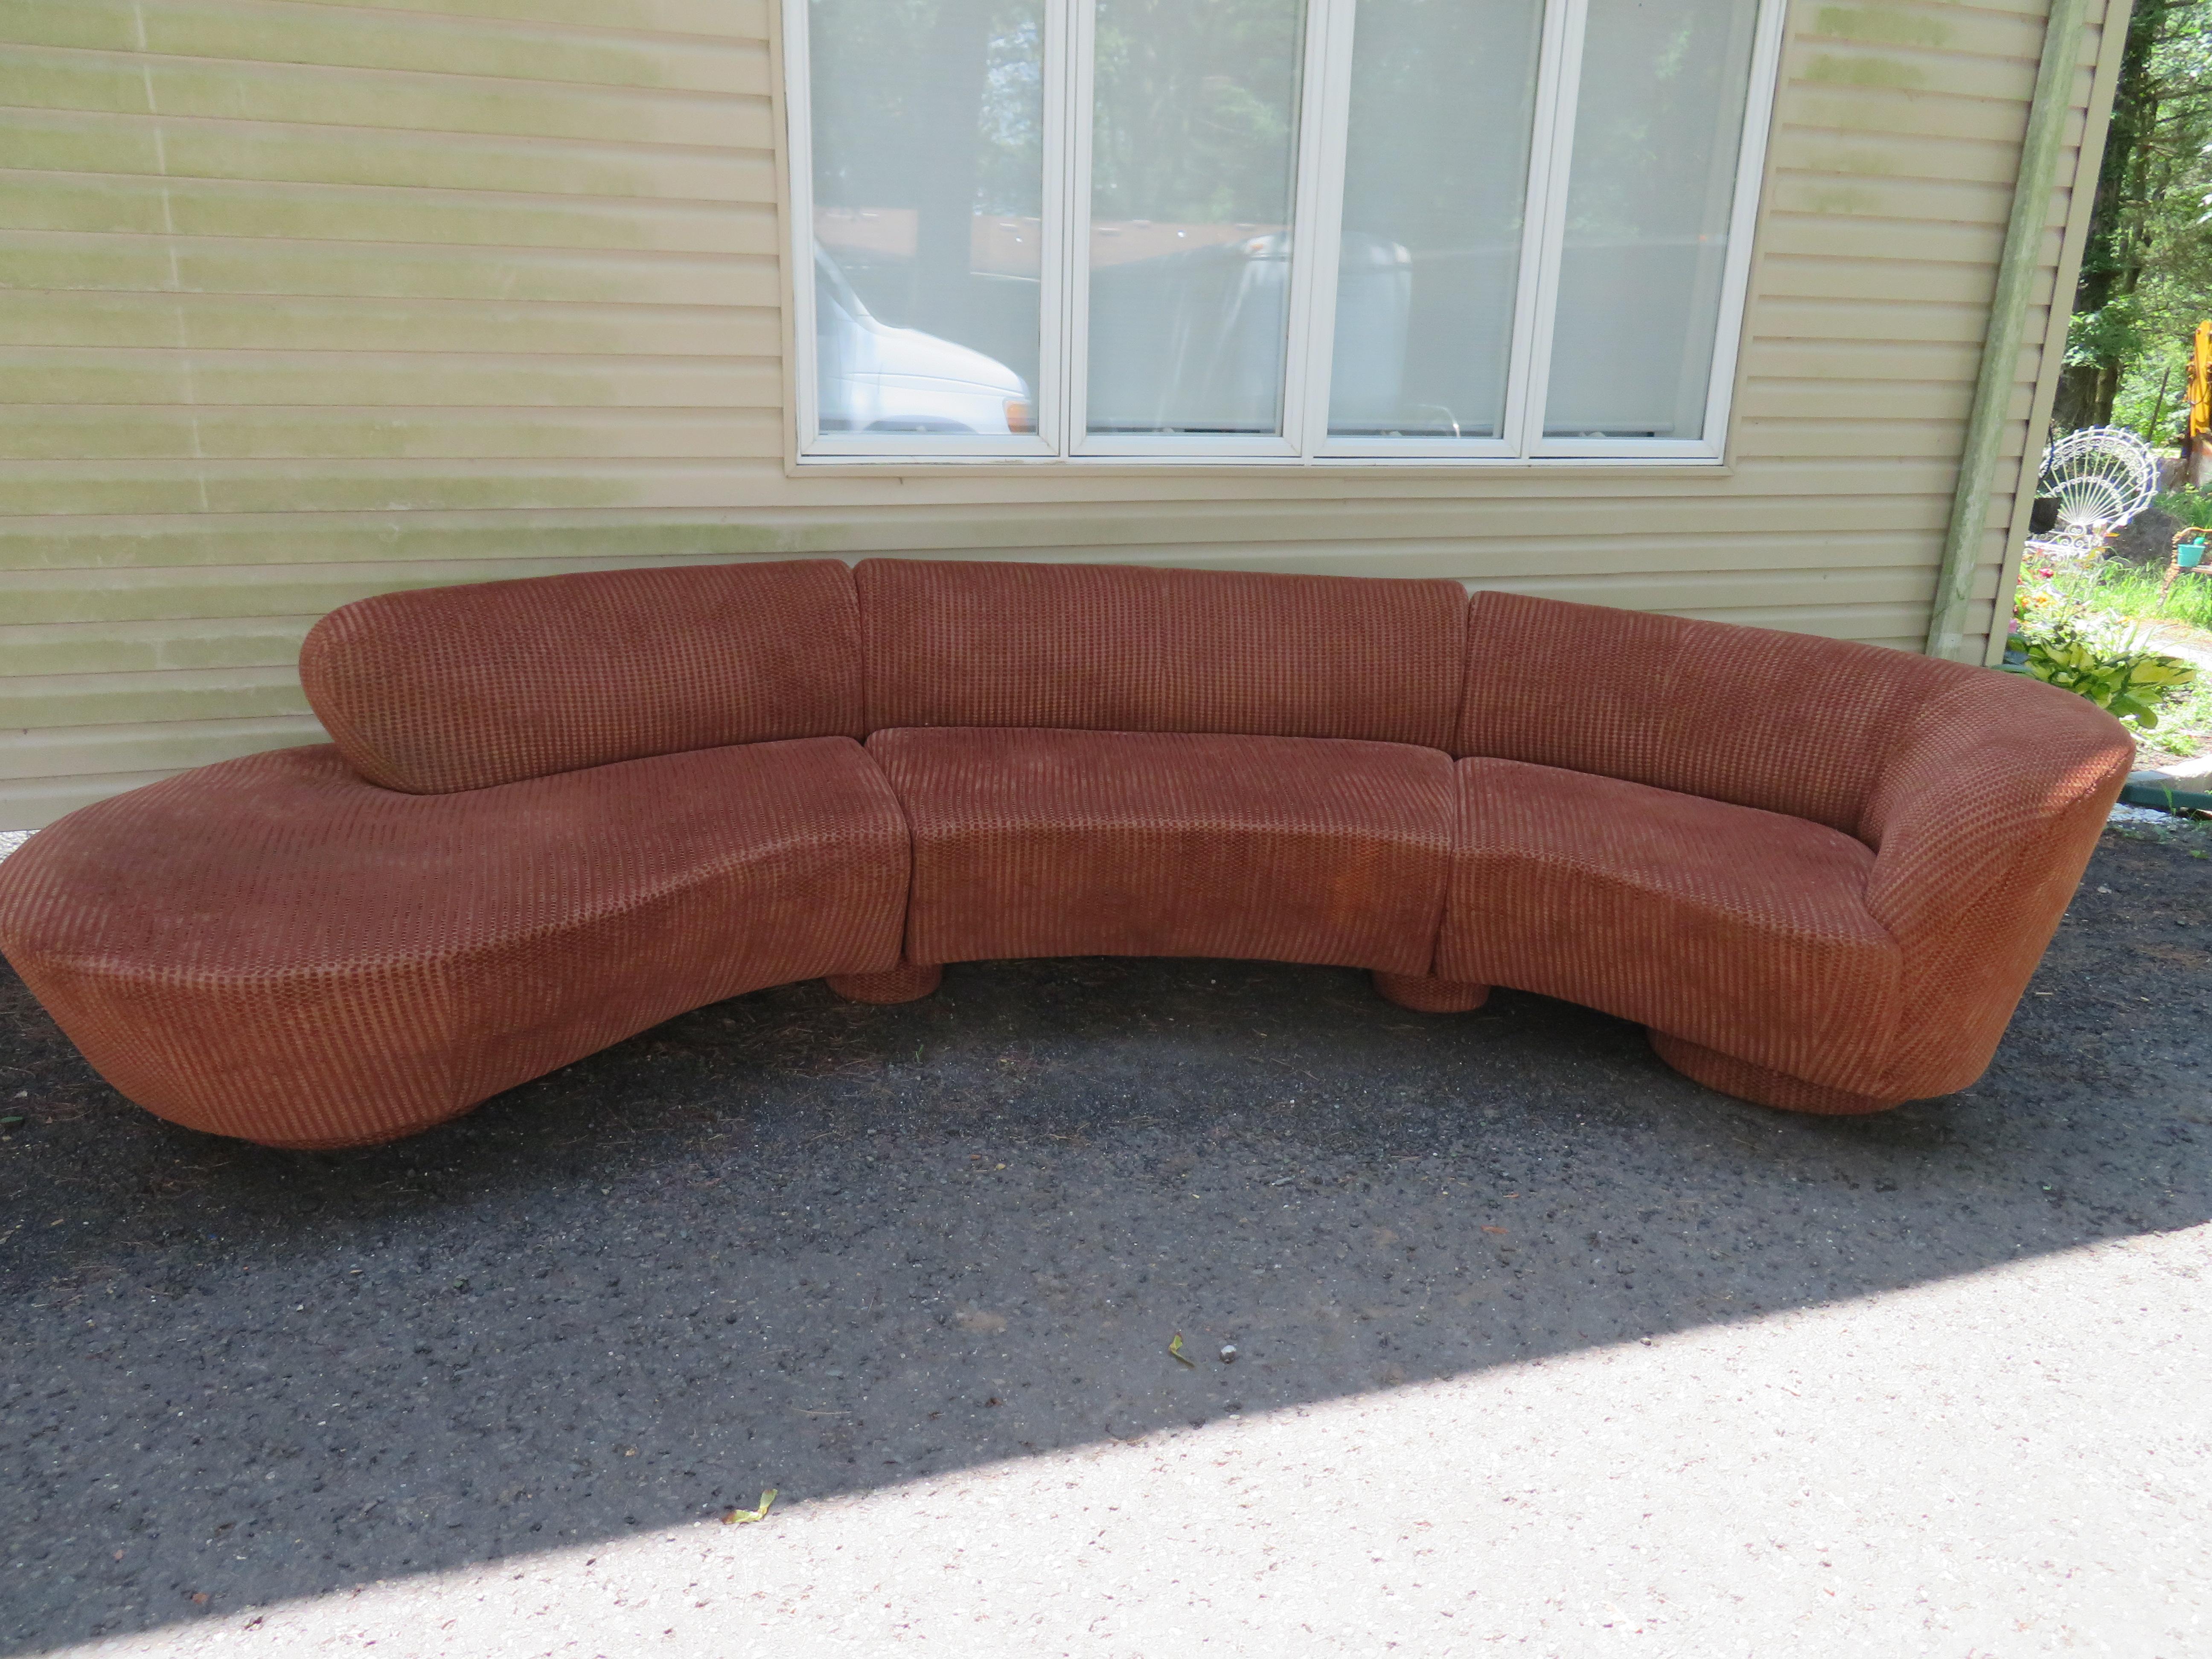 Spectacular Vladimir Kagan curved 3-piece cloud sofa sectional with Directional label. This rare sofa sectional retains its original orange brown fabric in presentable condition. This sofa as shown measures 28